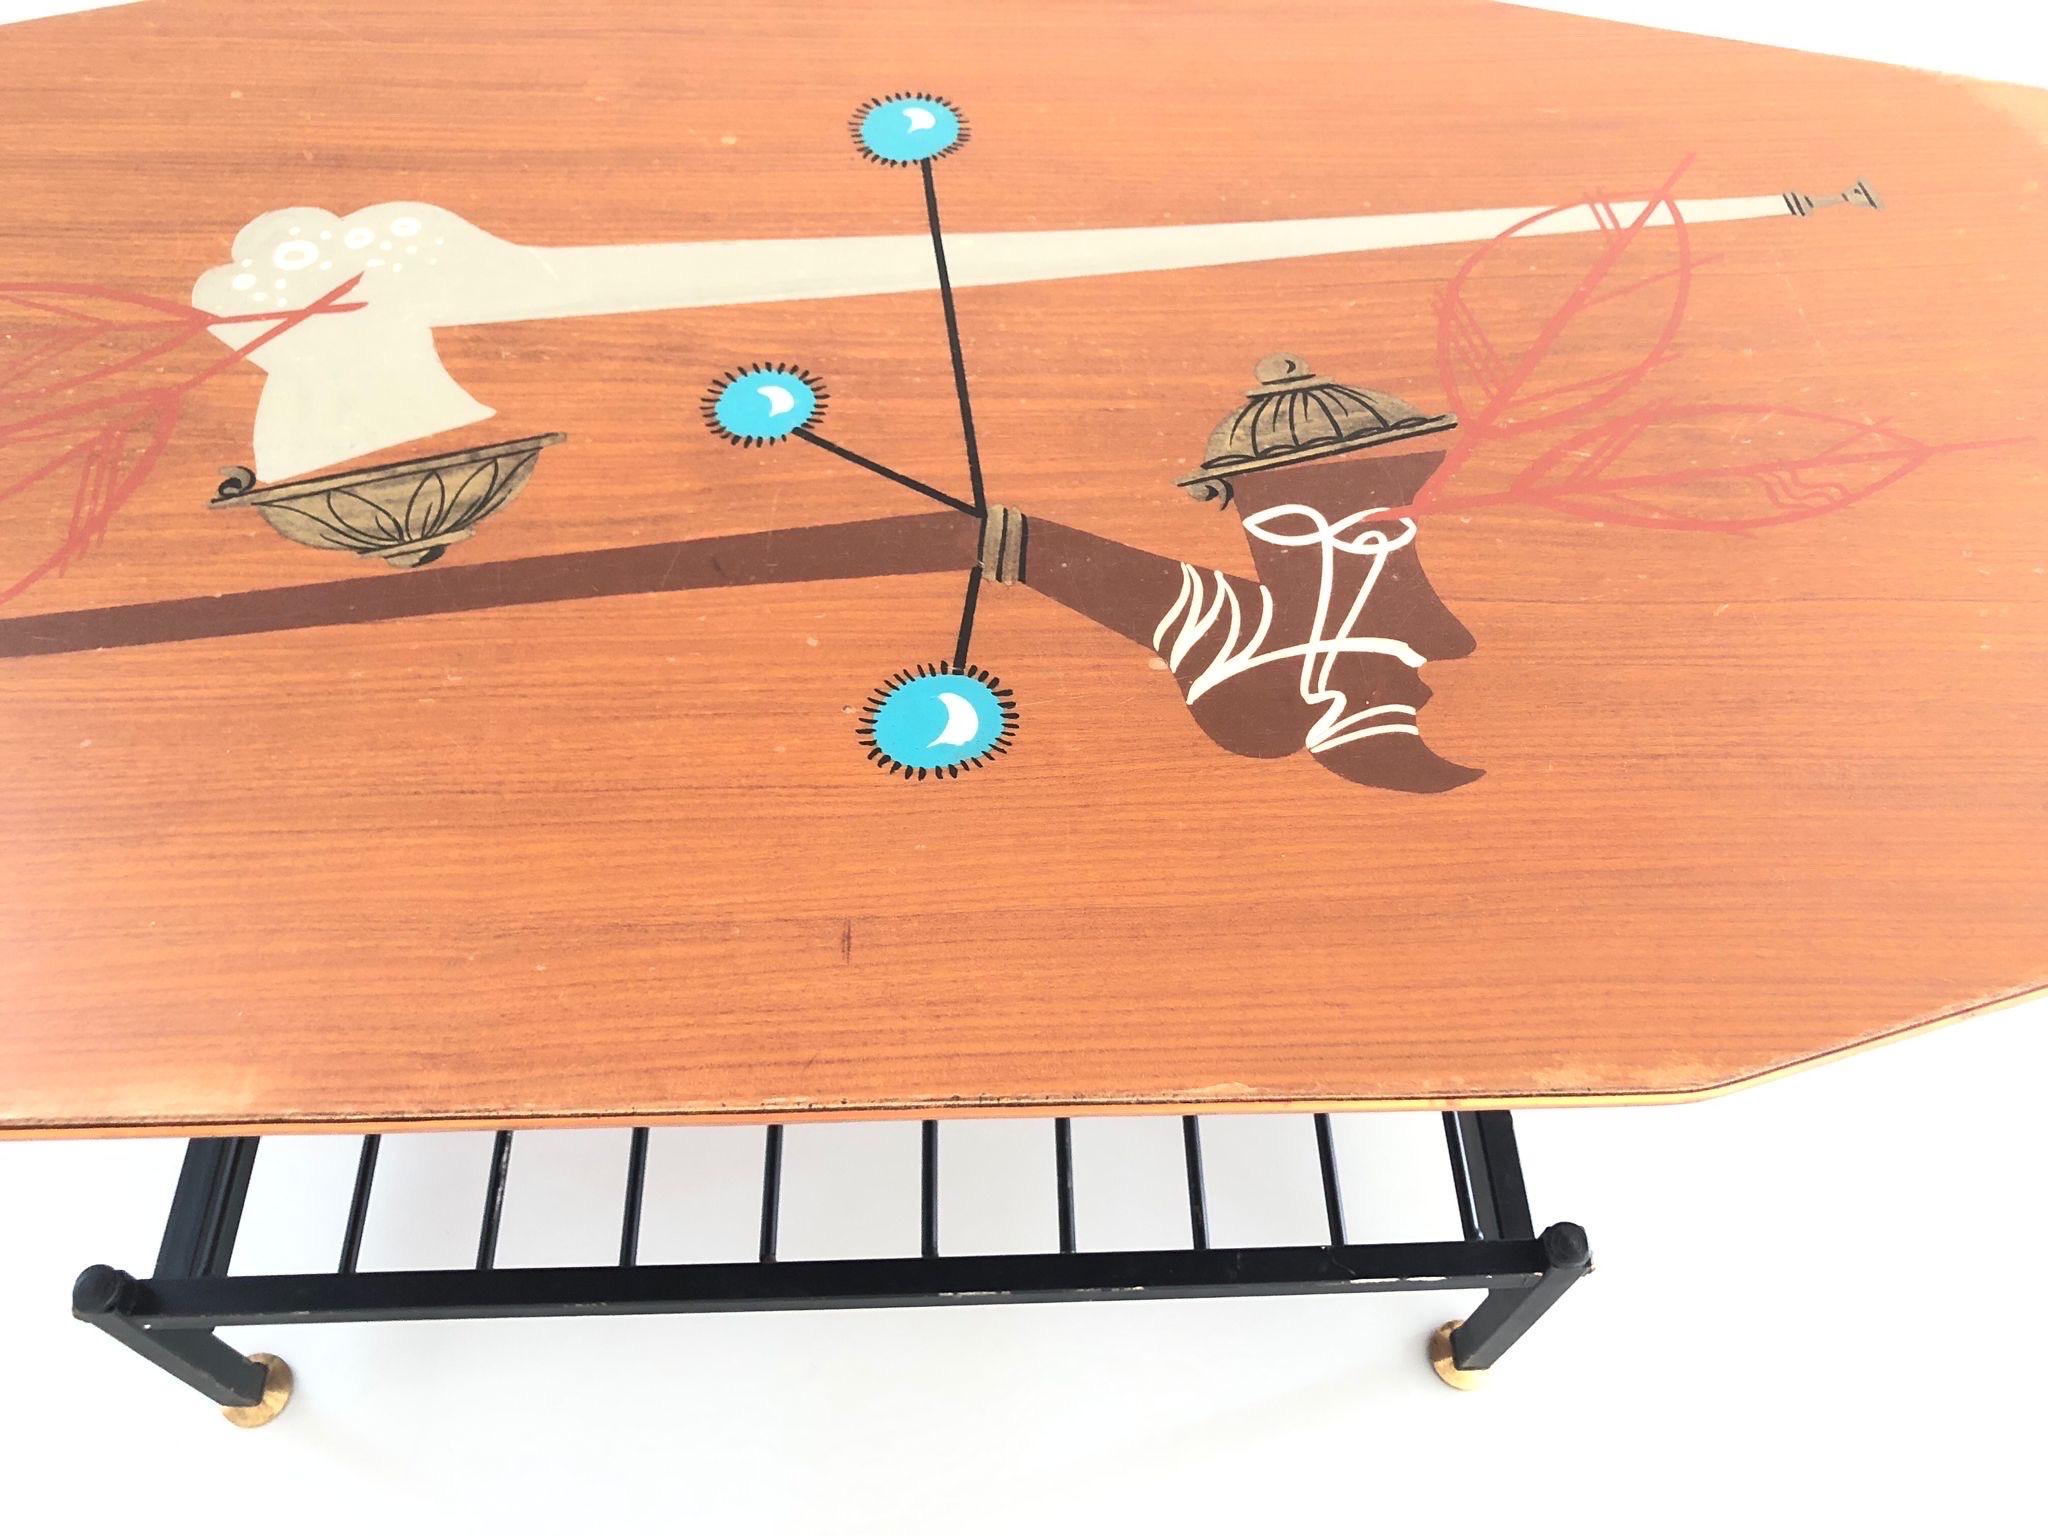 Hand-painted Illustrated Wood Coffee or Center Table, 1950s, Italy For Sale 4